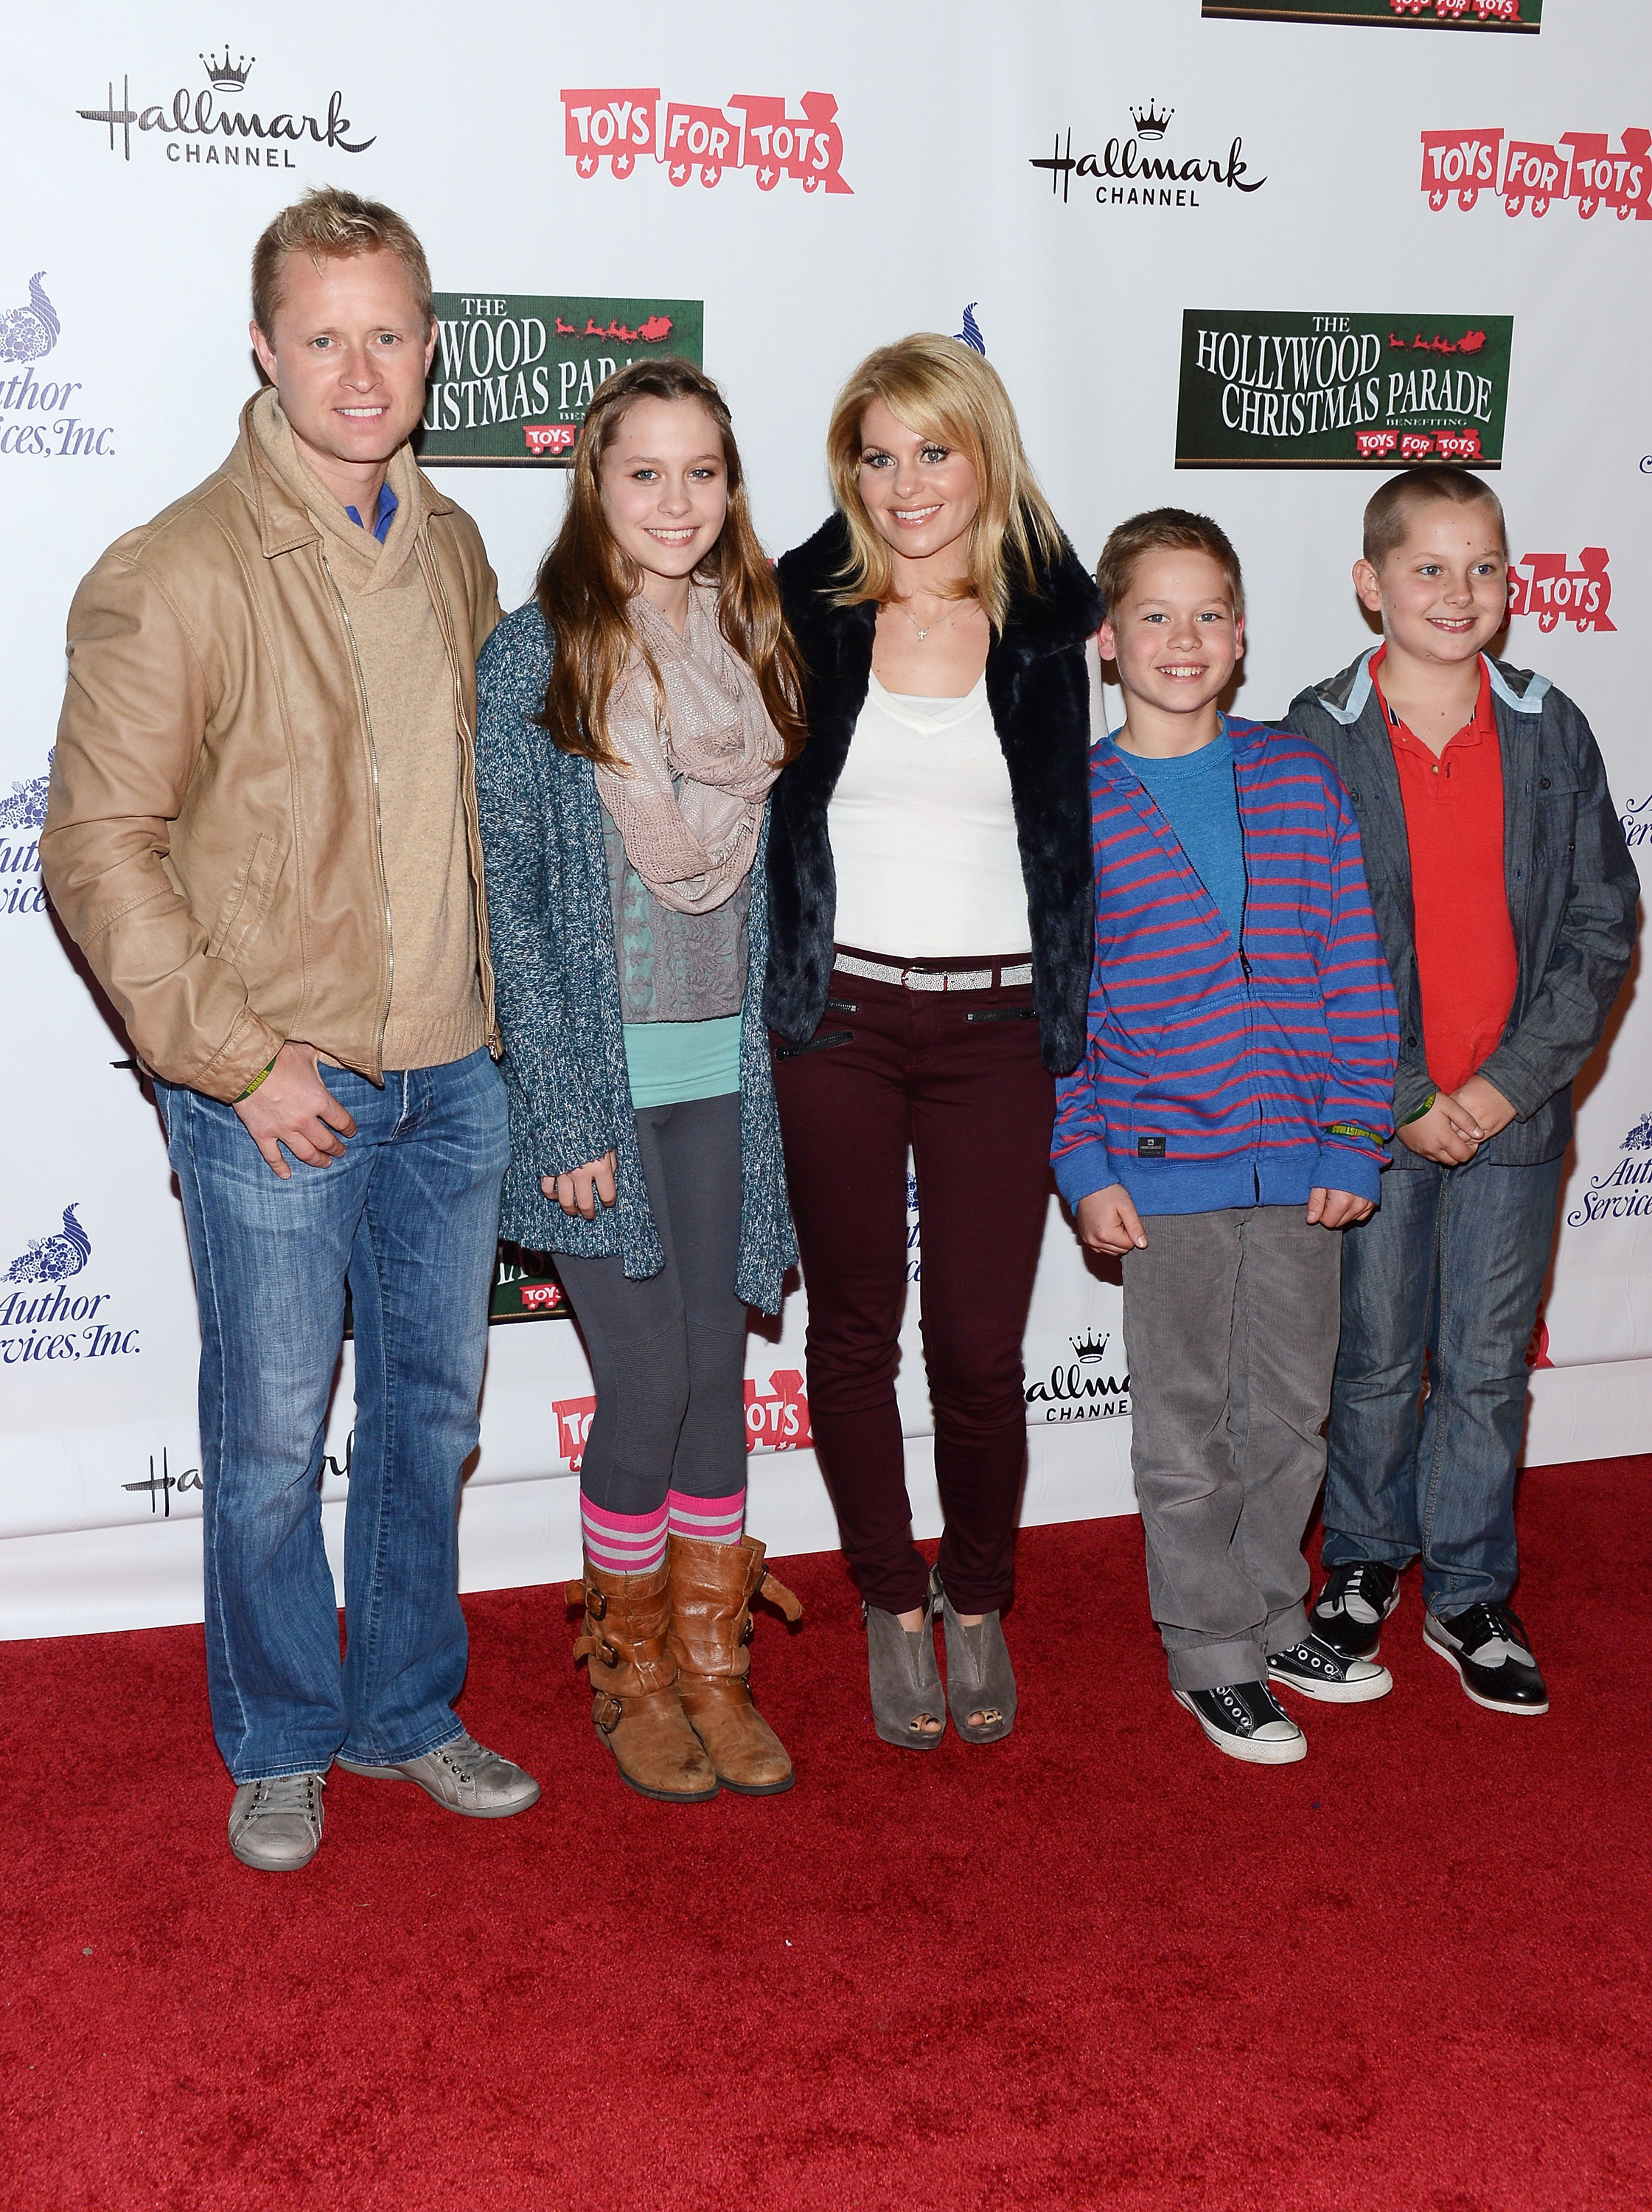 Actress Candace Cameron Bure (C) and her family in Hollywood, California on November 25, 2012 | Source: Getty Images